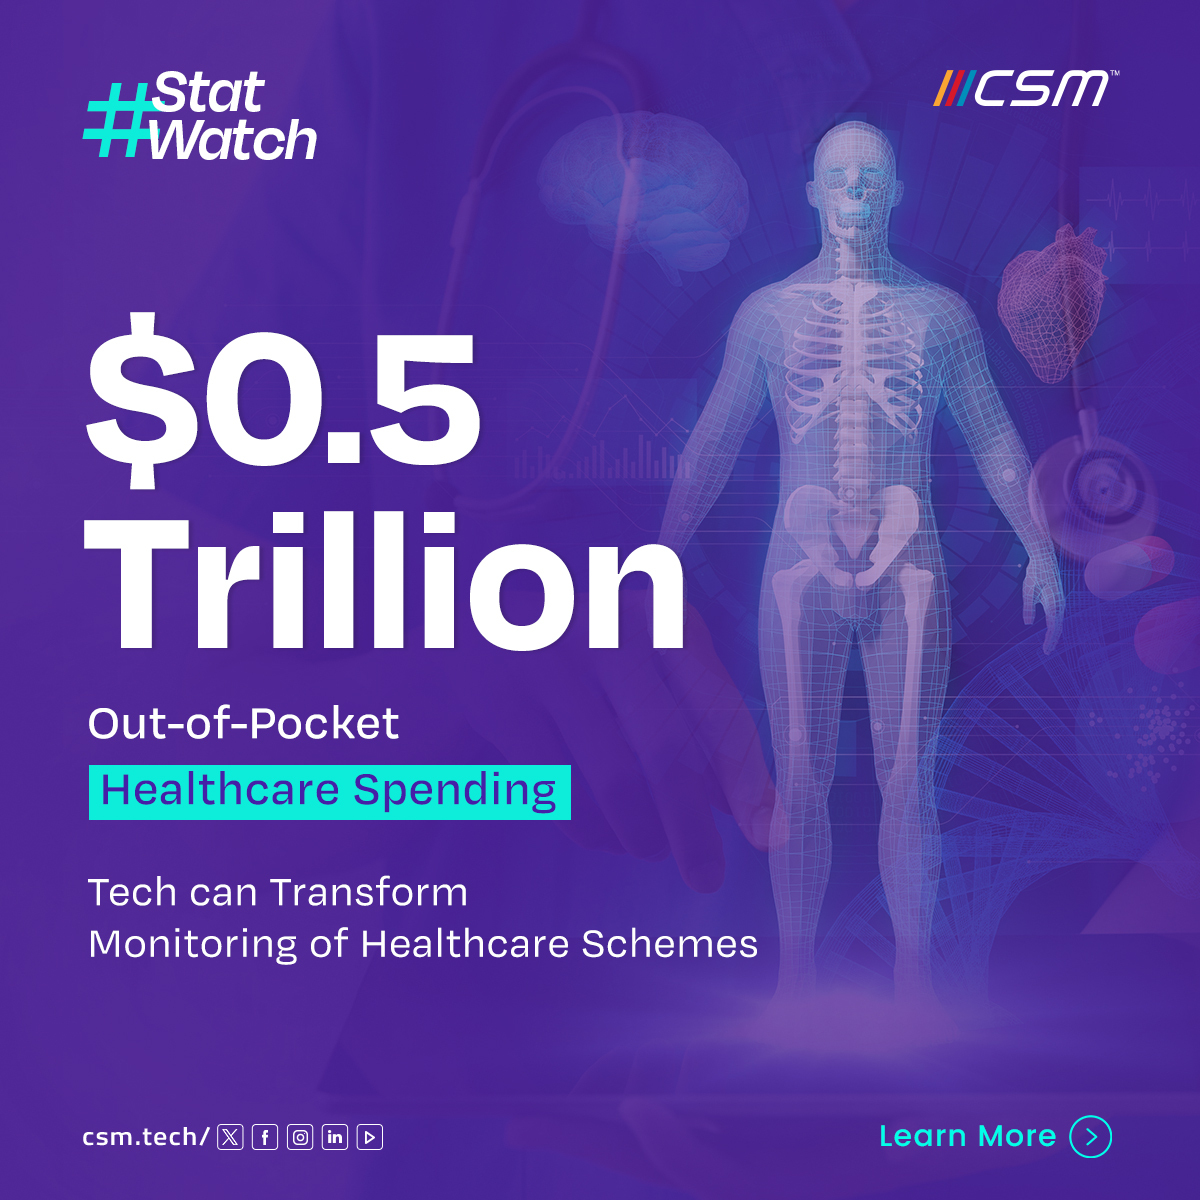 Explore the challenges of healthcare accessibility & how technology can overcome these.  

👉Know More: bit.ly/3WEmeM3 

#CSMTech #Healthcare #HealthcareScheme #SchemeMonitoring #DigitalTransformation